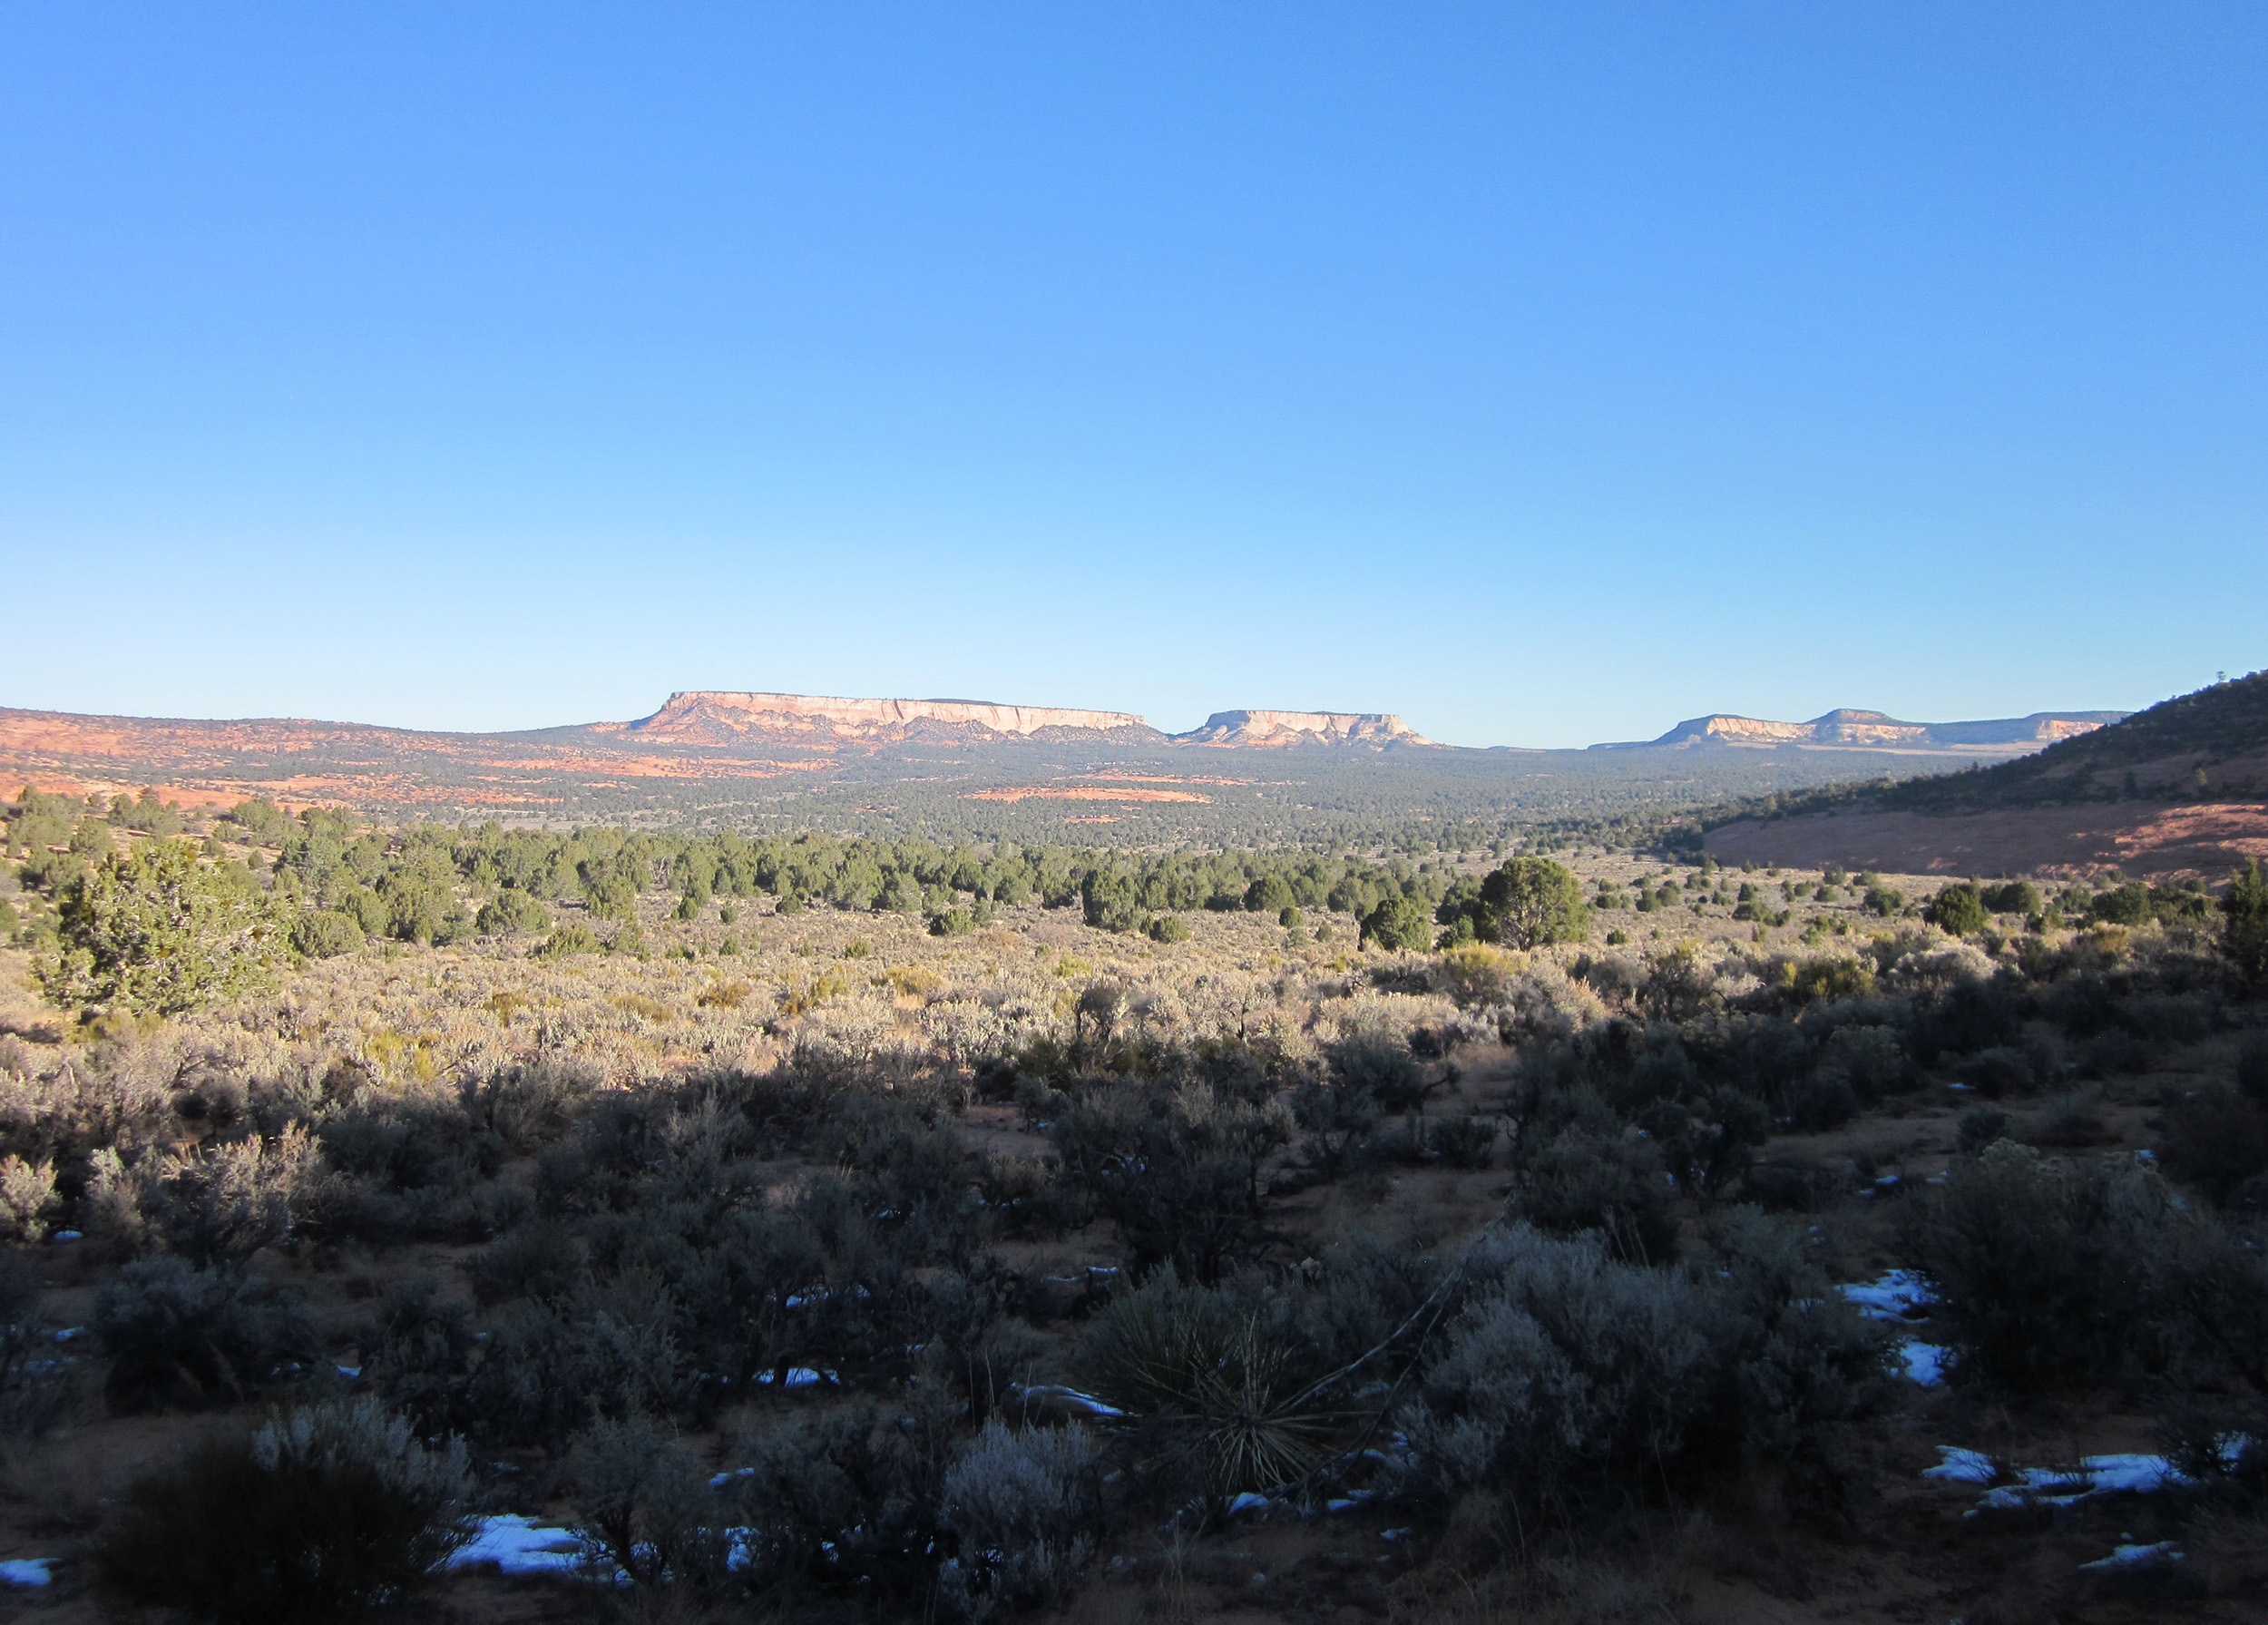 Wilson & Company successfully completed a comprehensive archaeological pedestrian survey spanning 2,596 acres of Bureau of Land Management (BLM) and school trust lands situated along the Utah-Arizona border.